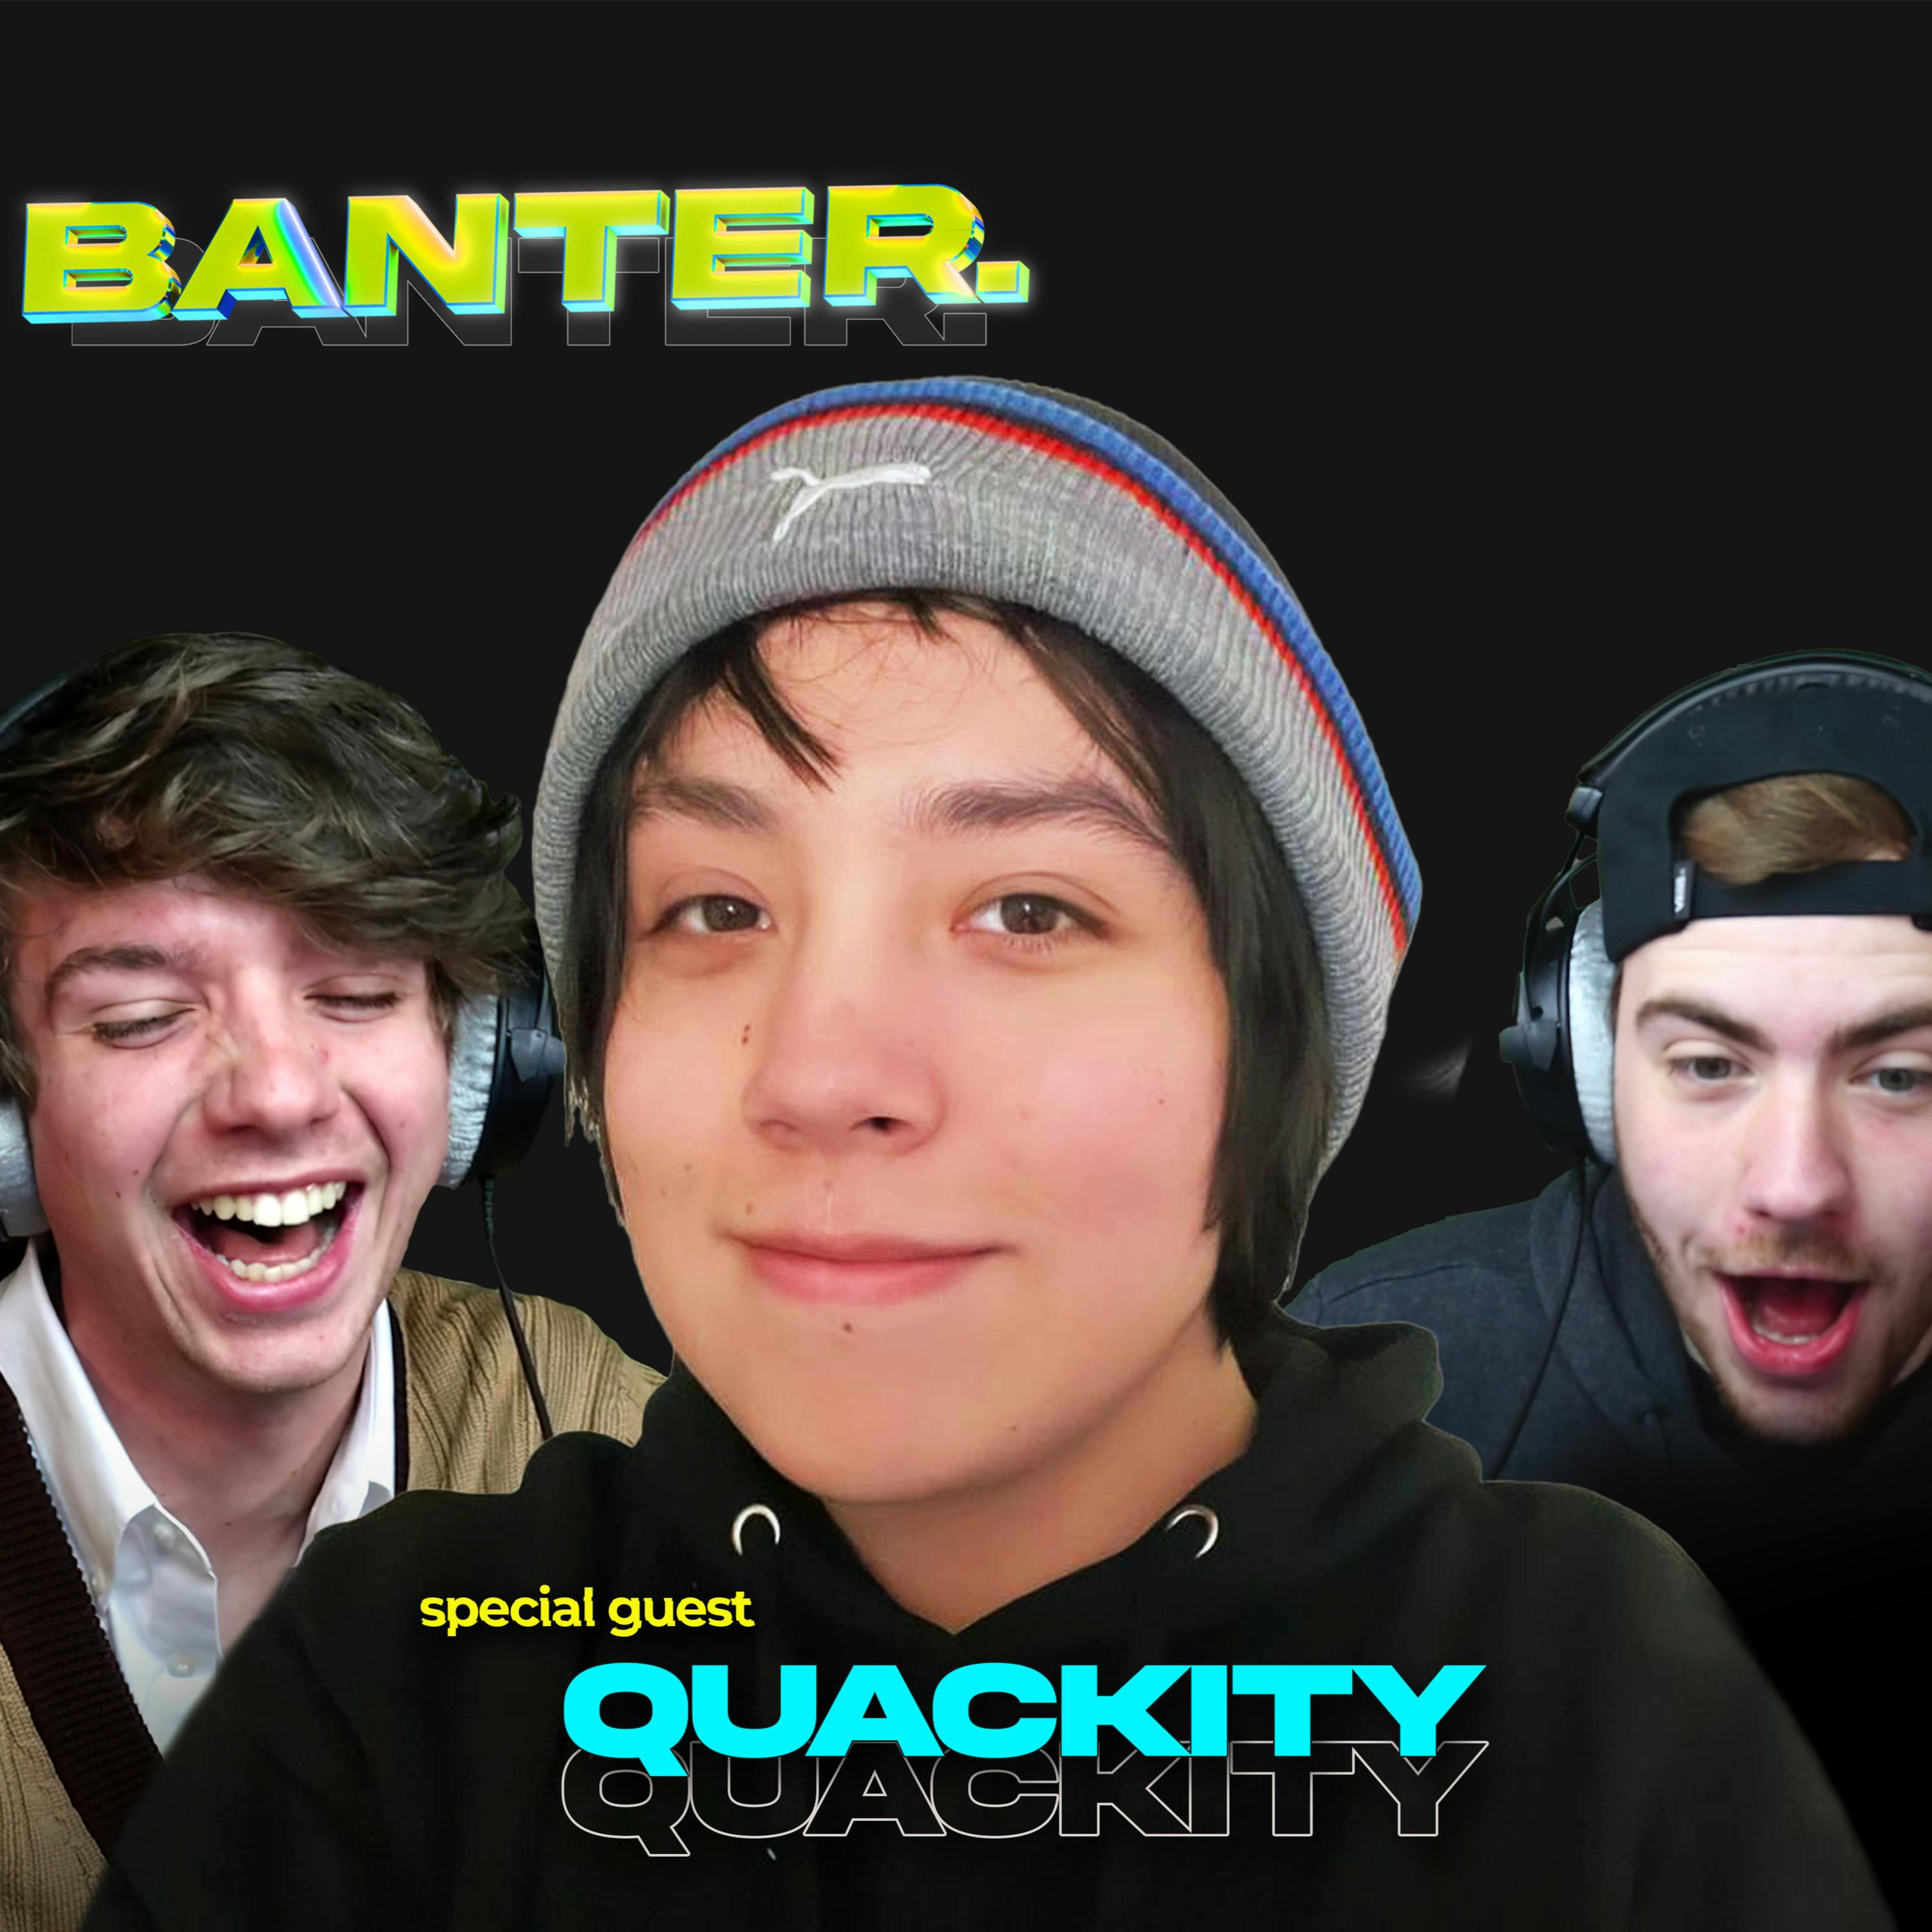 Twitch - Ready for some great banter? GeorgeNotFound & Sapnap are